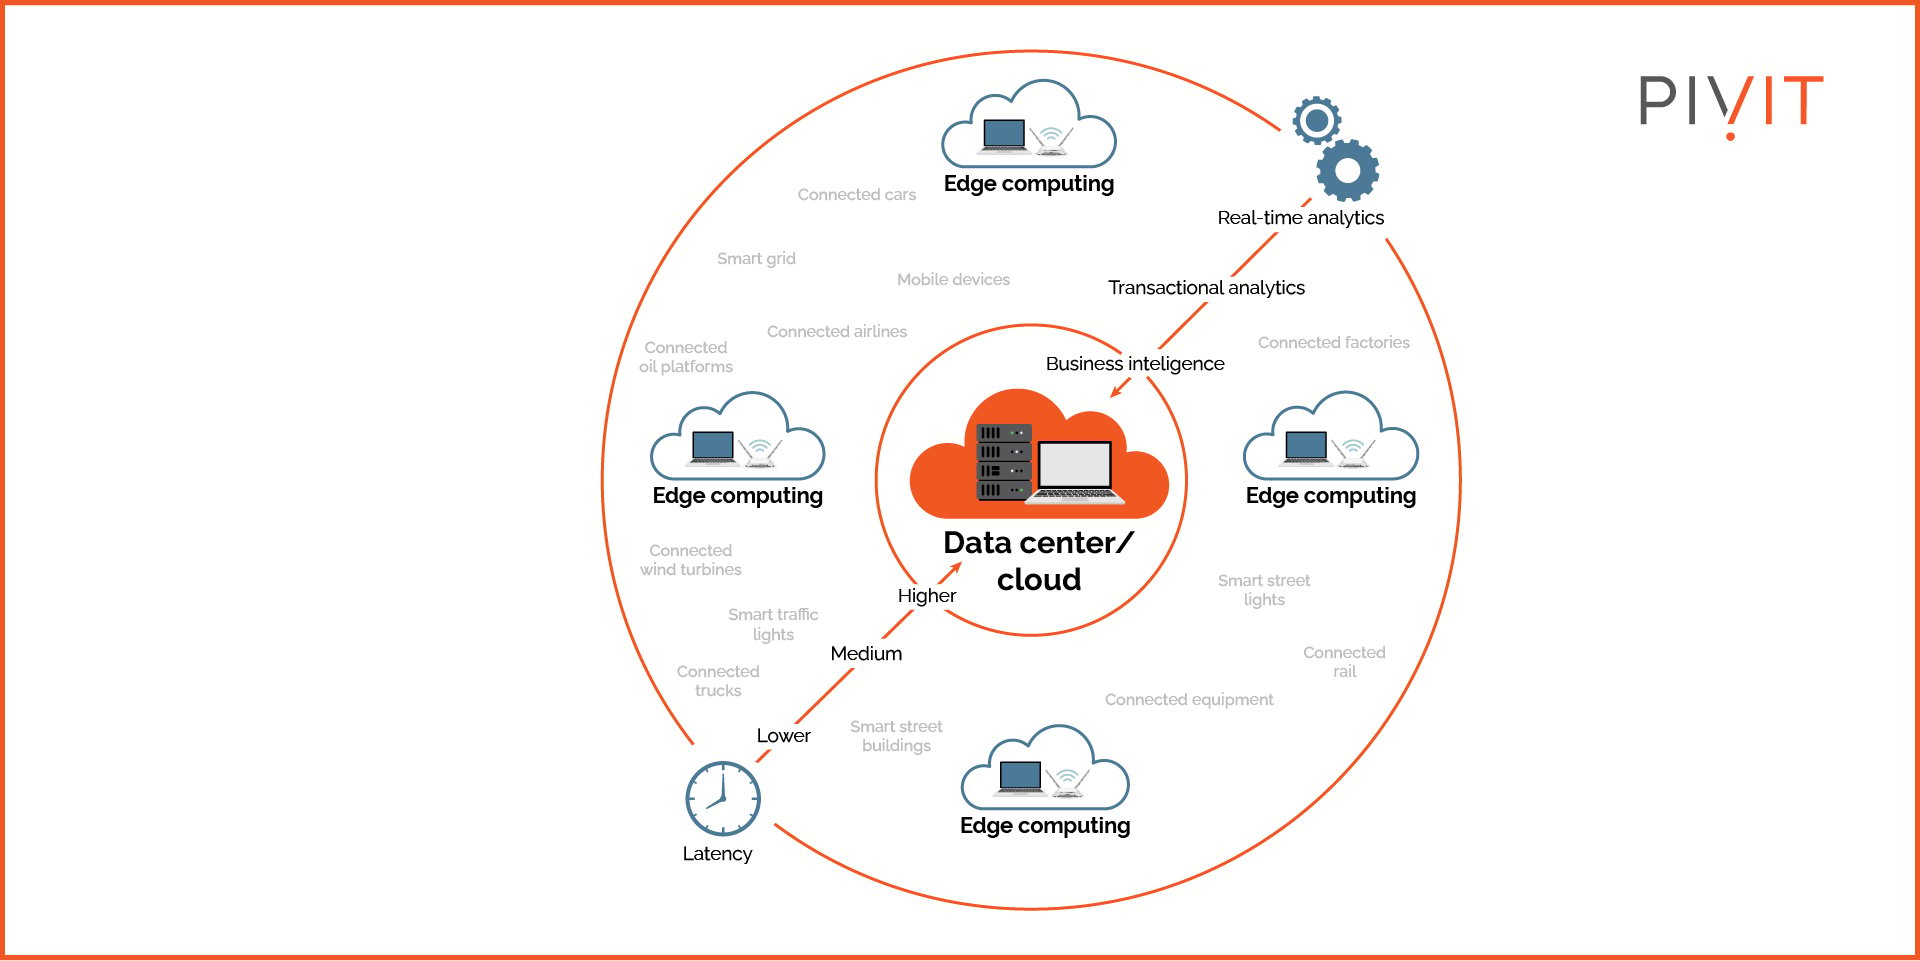 Edge computing interconnected services